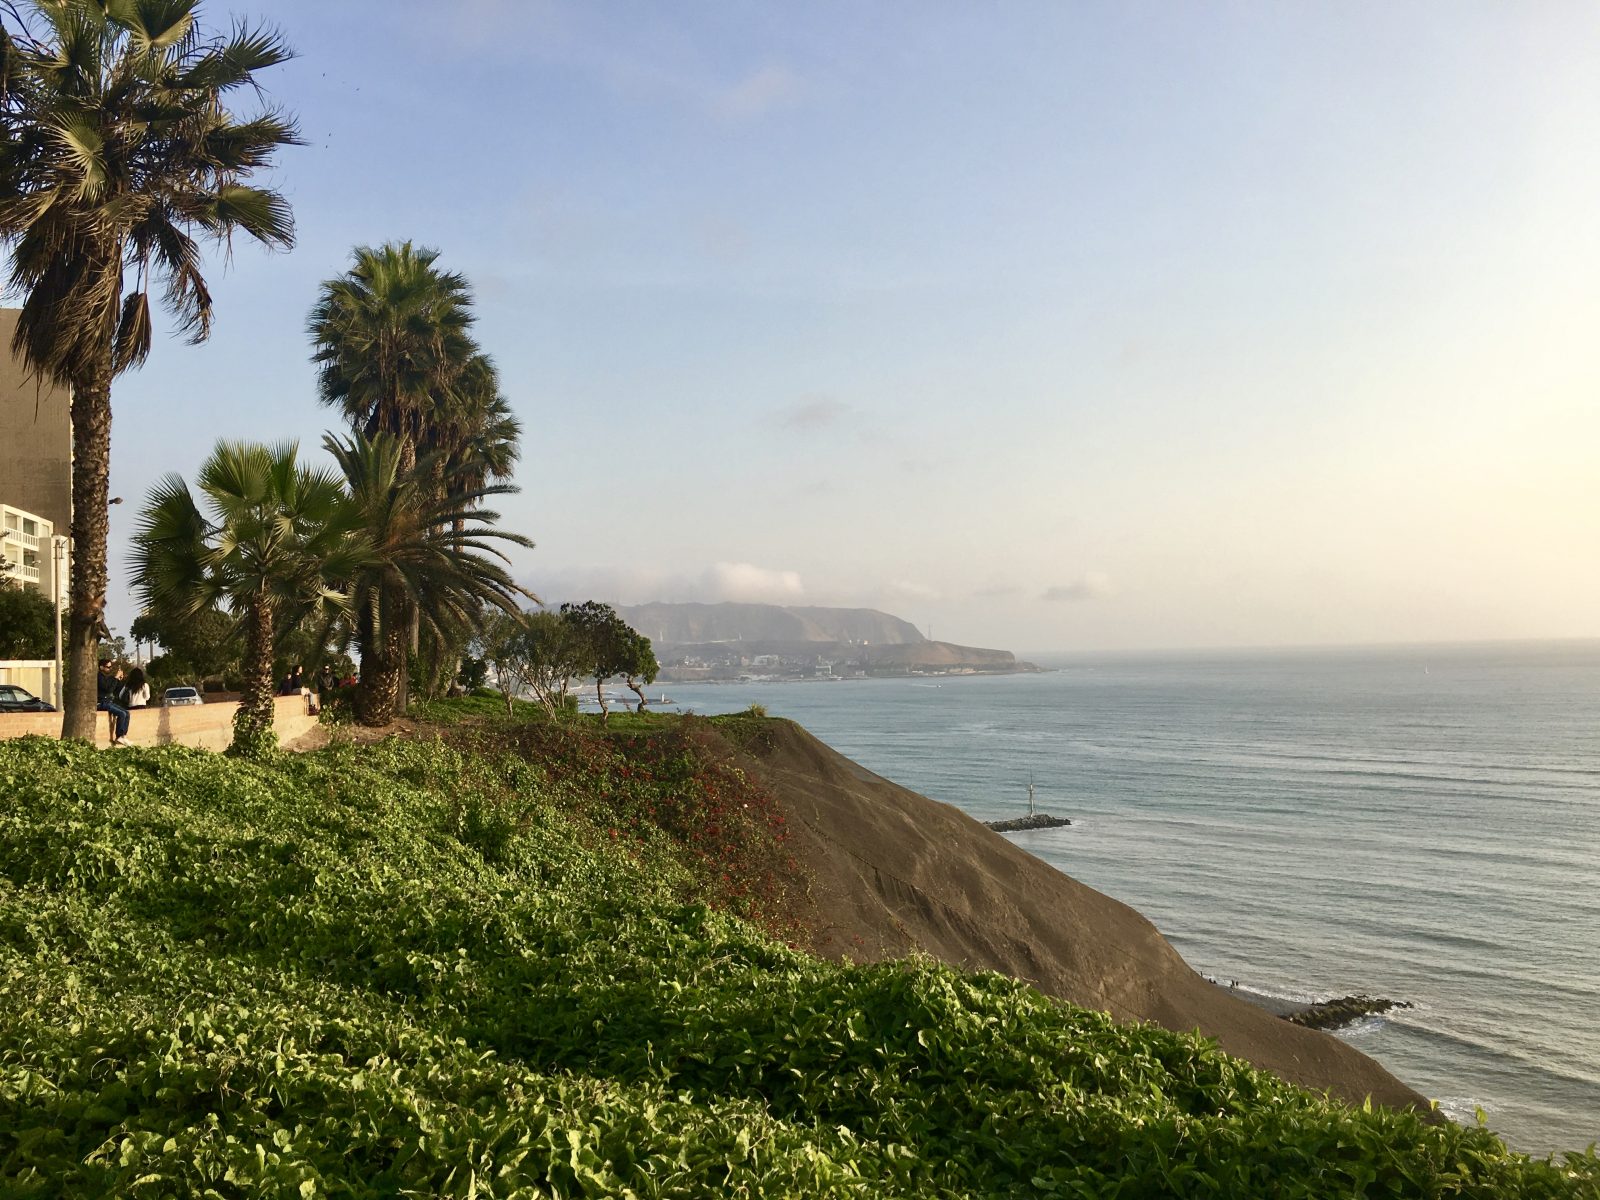 View of the Pacific from Belmond Miraflores Park, Lima